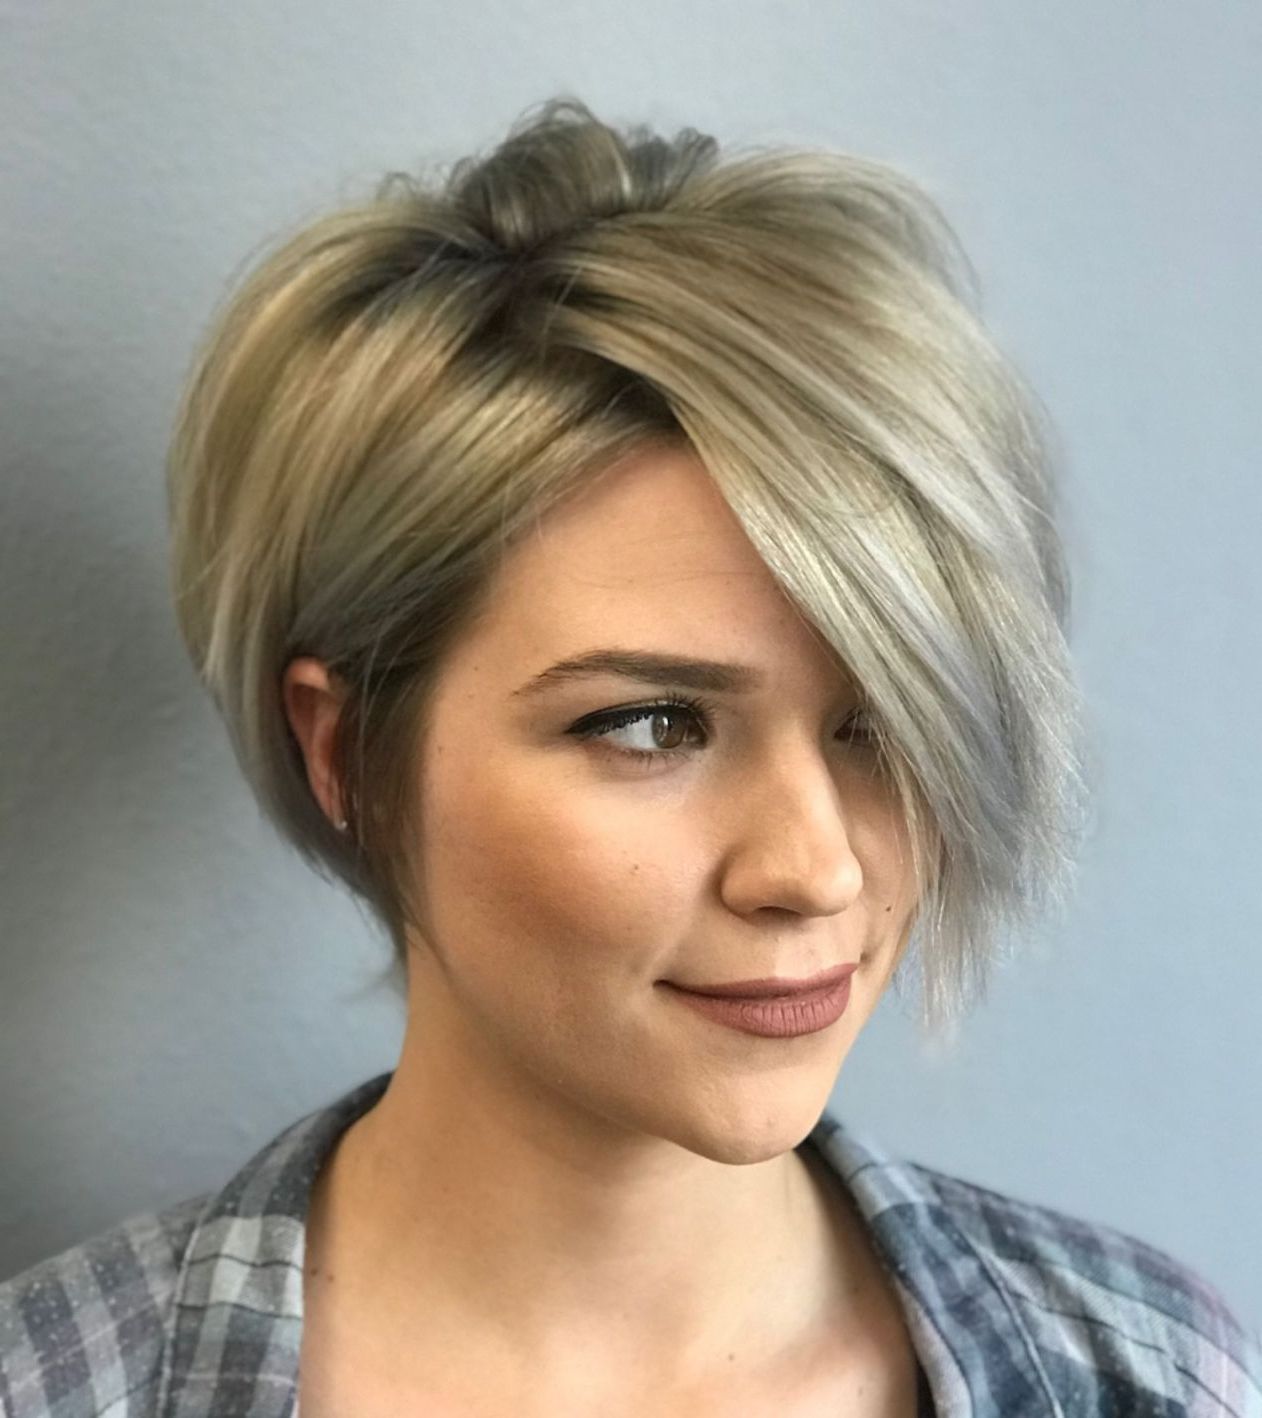 100 Mind Blowing Short Hairstyles For Fine Hair | Hair Cuts Pertaining To Dynamic Tousled Blonde Bob Hairstyles With Dark Underlayer (View 10 of 20)